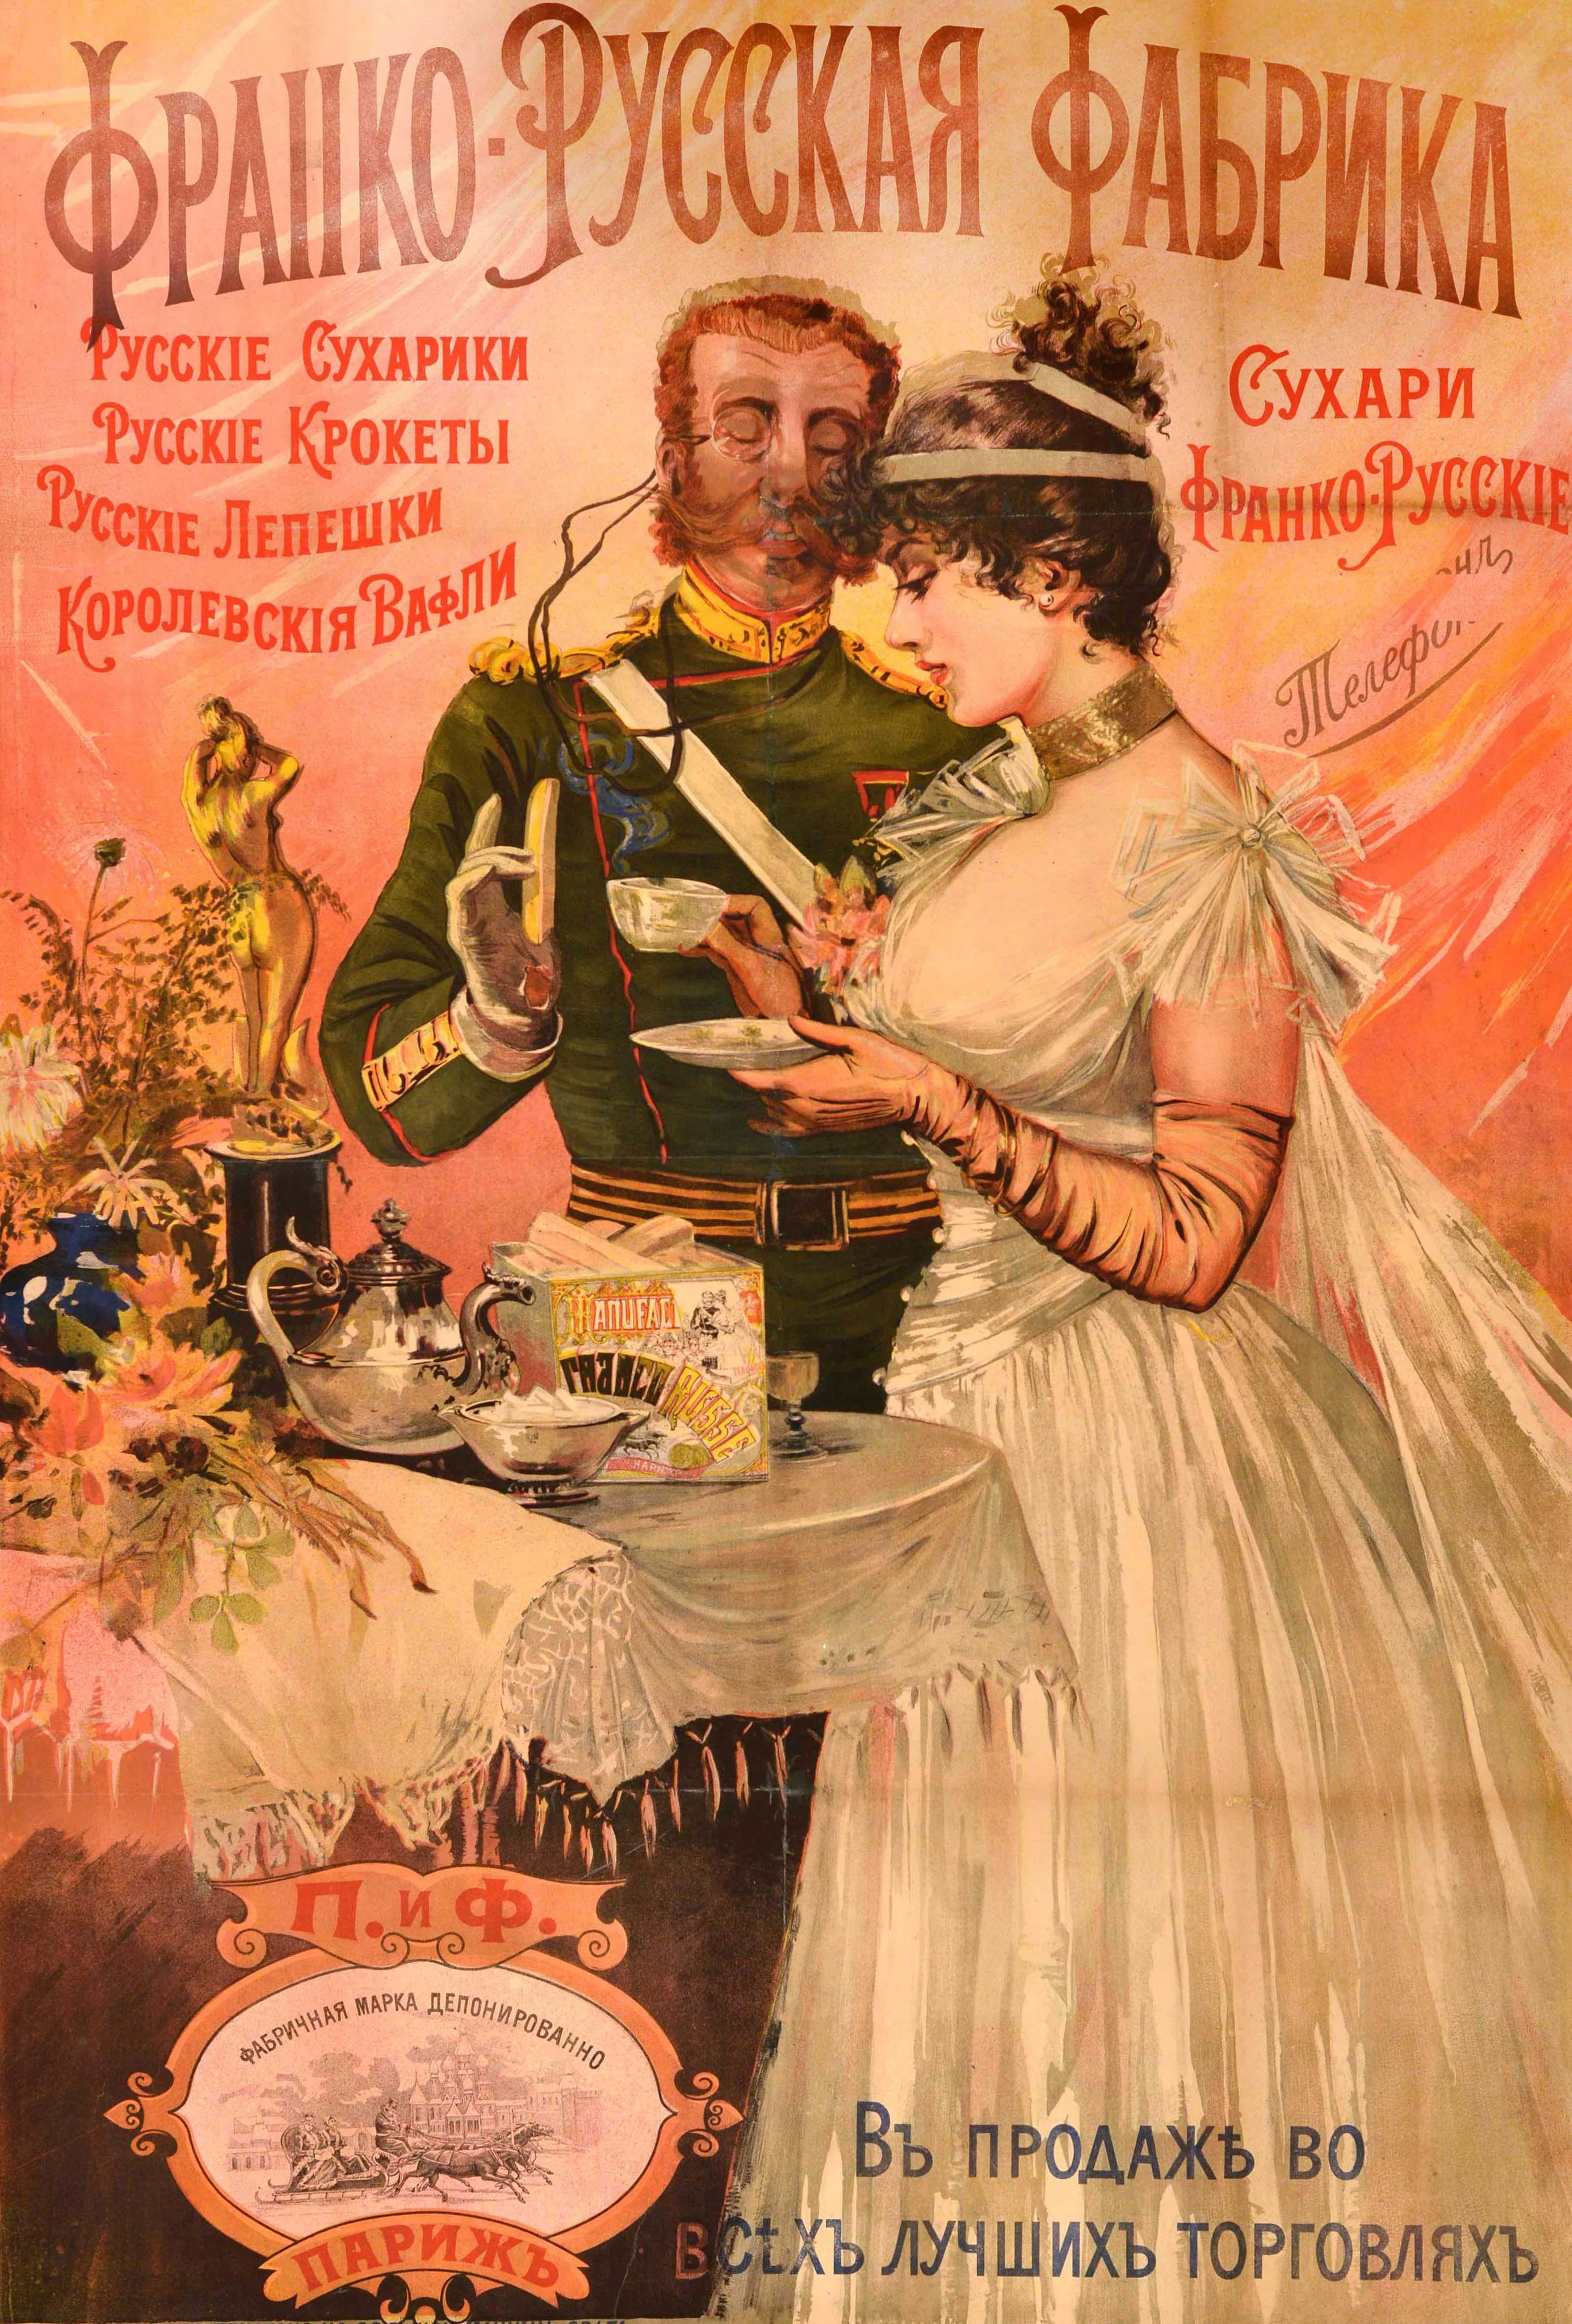 Original antique food advertising poster for the Франко Русская Фабрика / Franco Russian Factory featuring a Belle Epoque style illustration of an elegant lady in a white dress holding a cup of tea and a gentleman with a moustache in uniform wearing